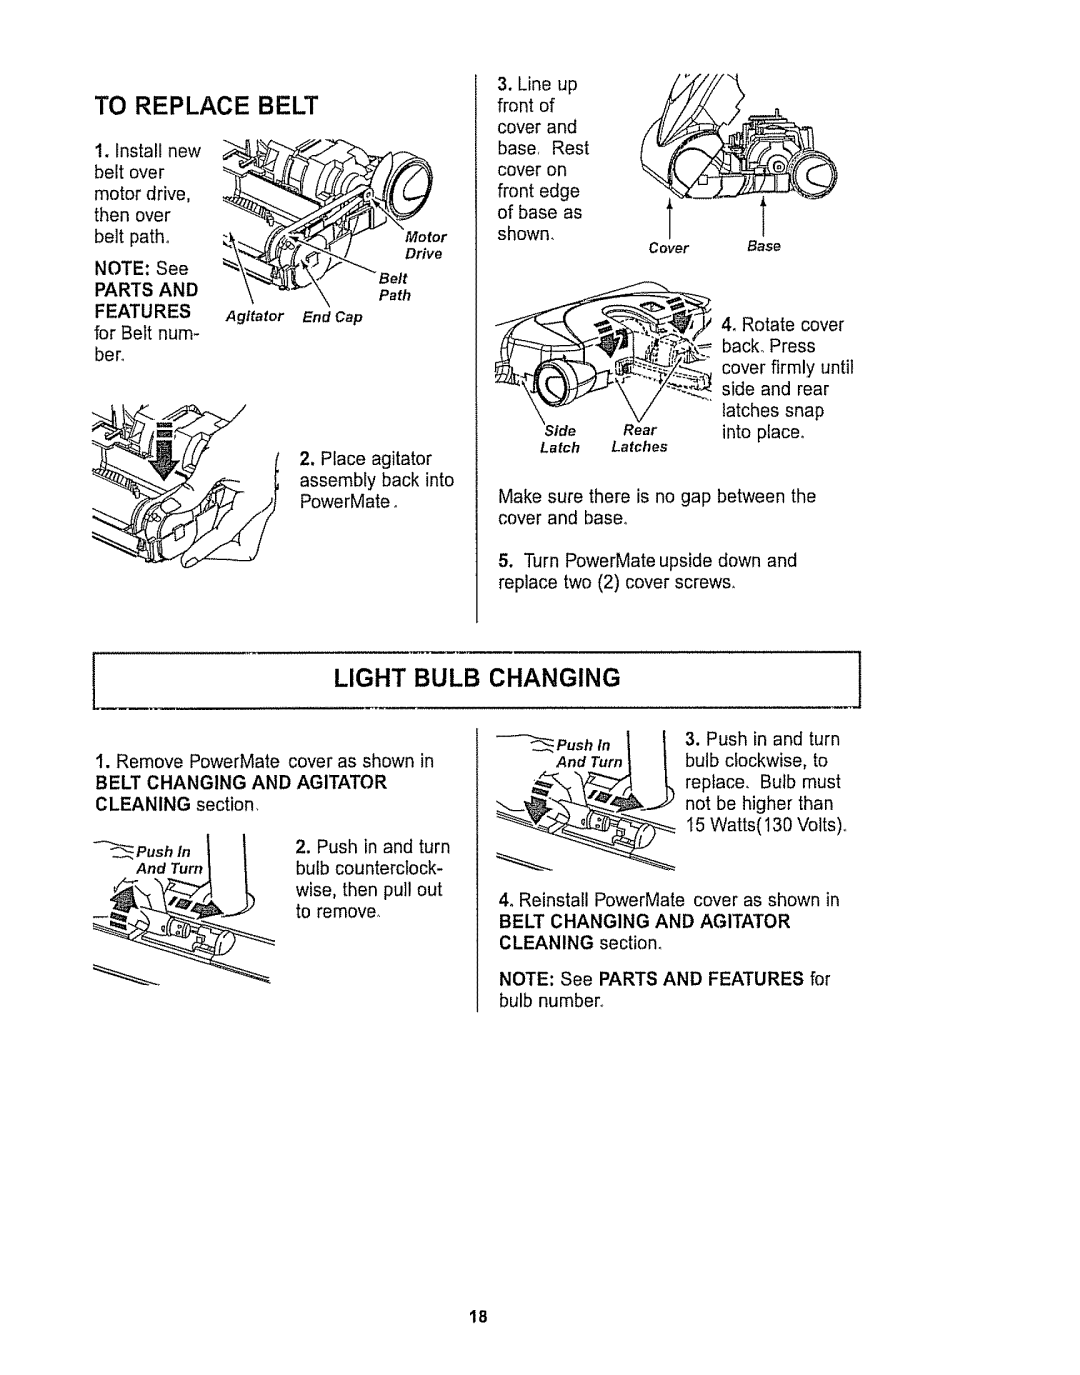 Kenmore 116.28615 owner manual To Replace Belt, Light Bulb Changing 